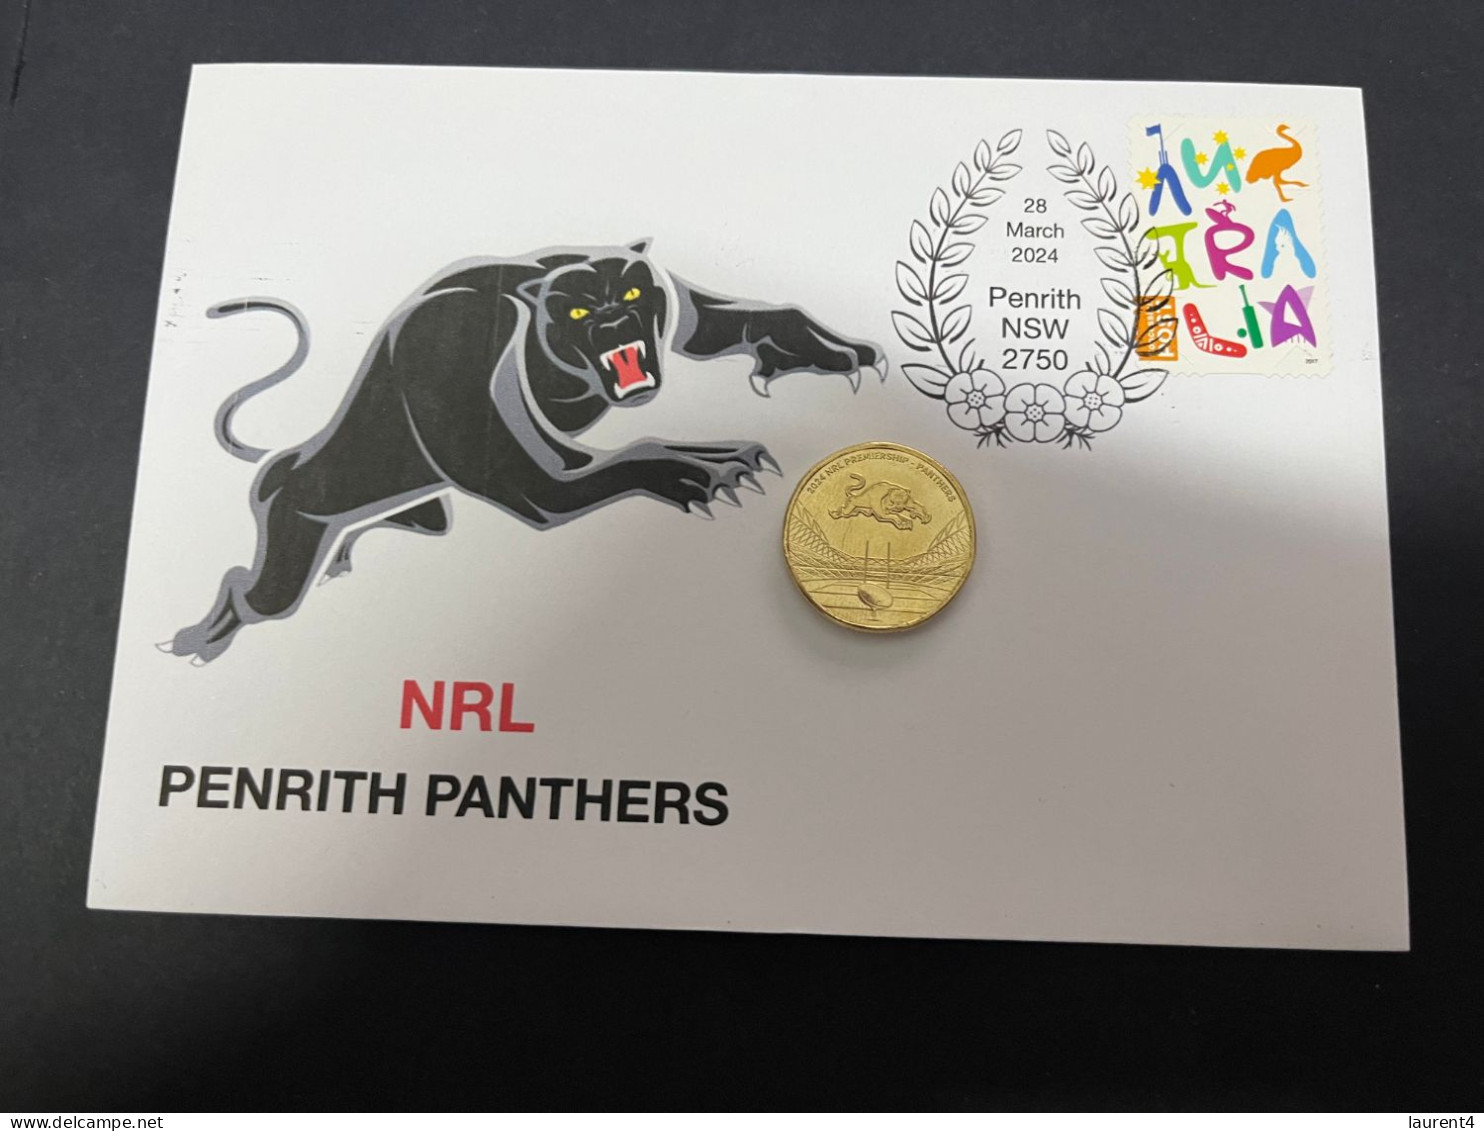 29-3-2024 (4 Y 23) Australian New $ 1.00 Coin (NRL Penrith Panthers) Released 28-3-2024 (1 X Coin On Cover) - Dollar